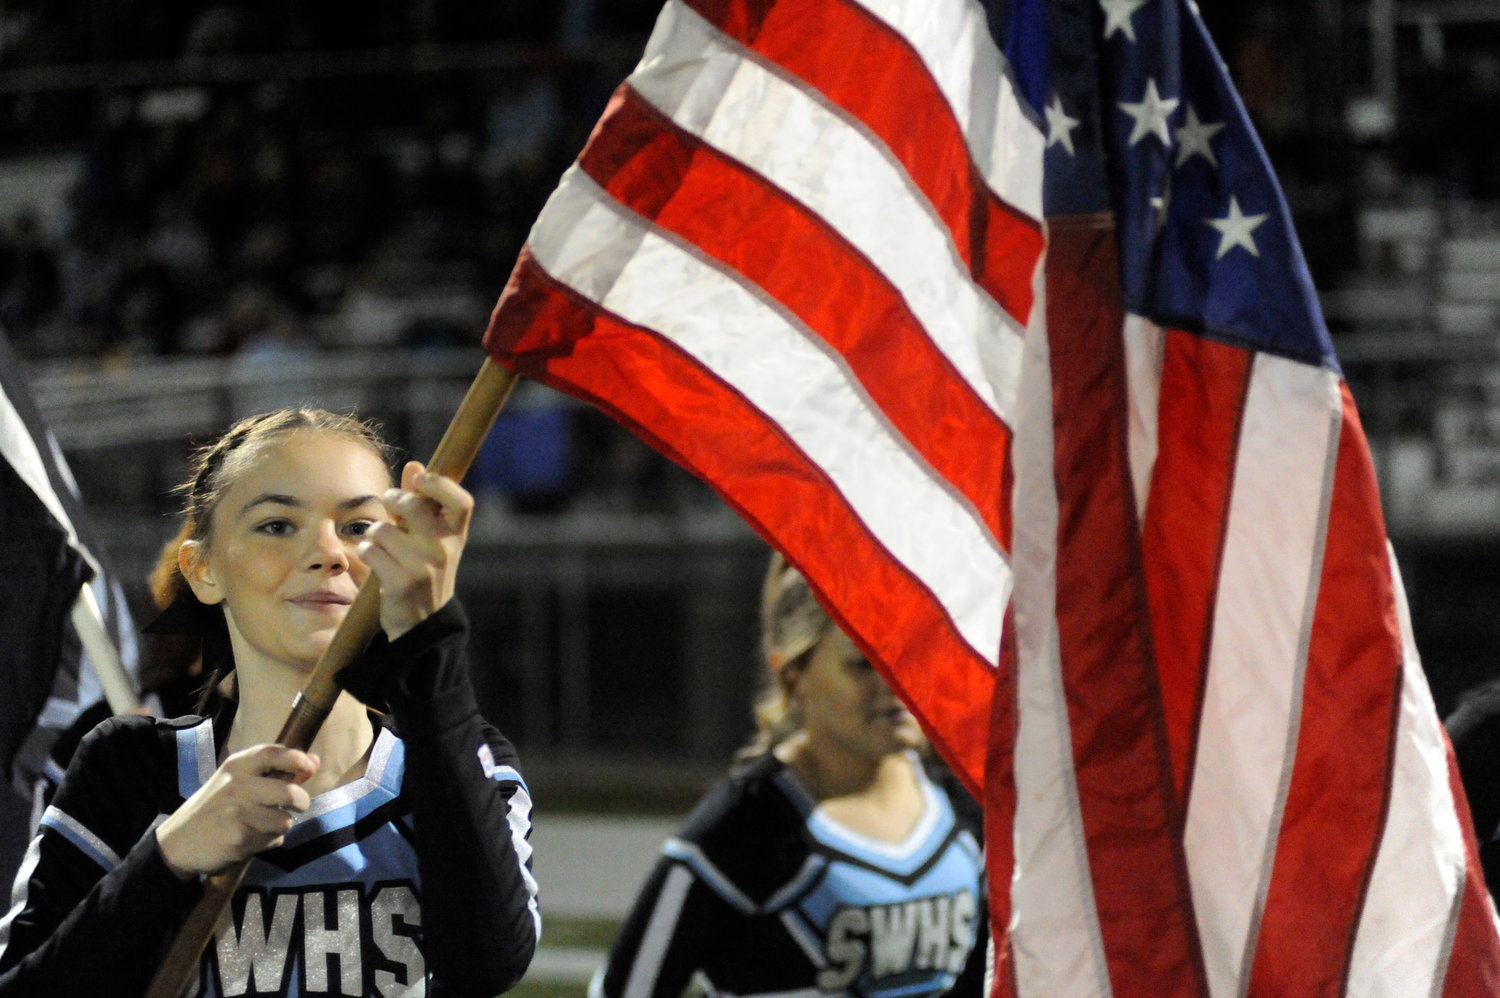 American pride. Sullivan West senior cheerleader Anabella “Bella” Wagner carried Old Glory onto the field before the opening kickoff...